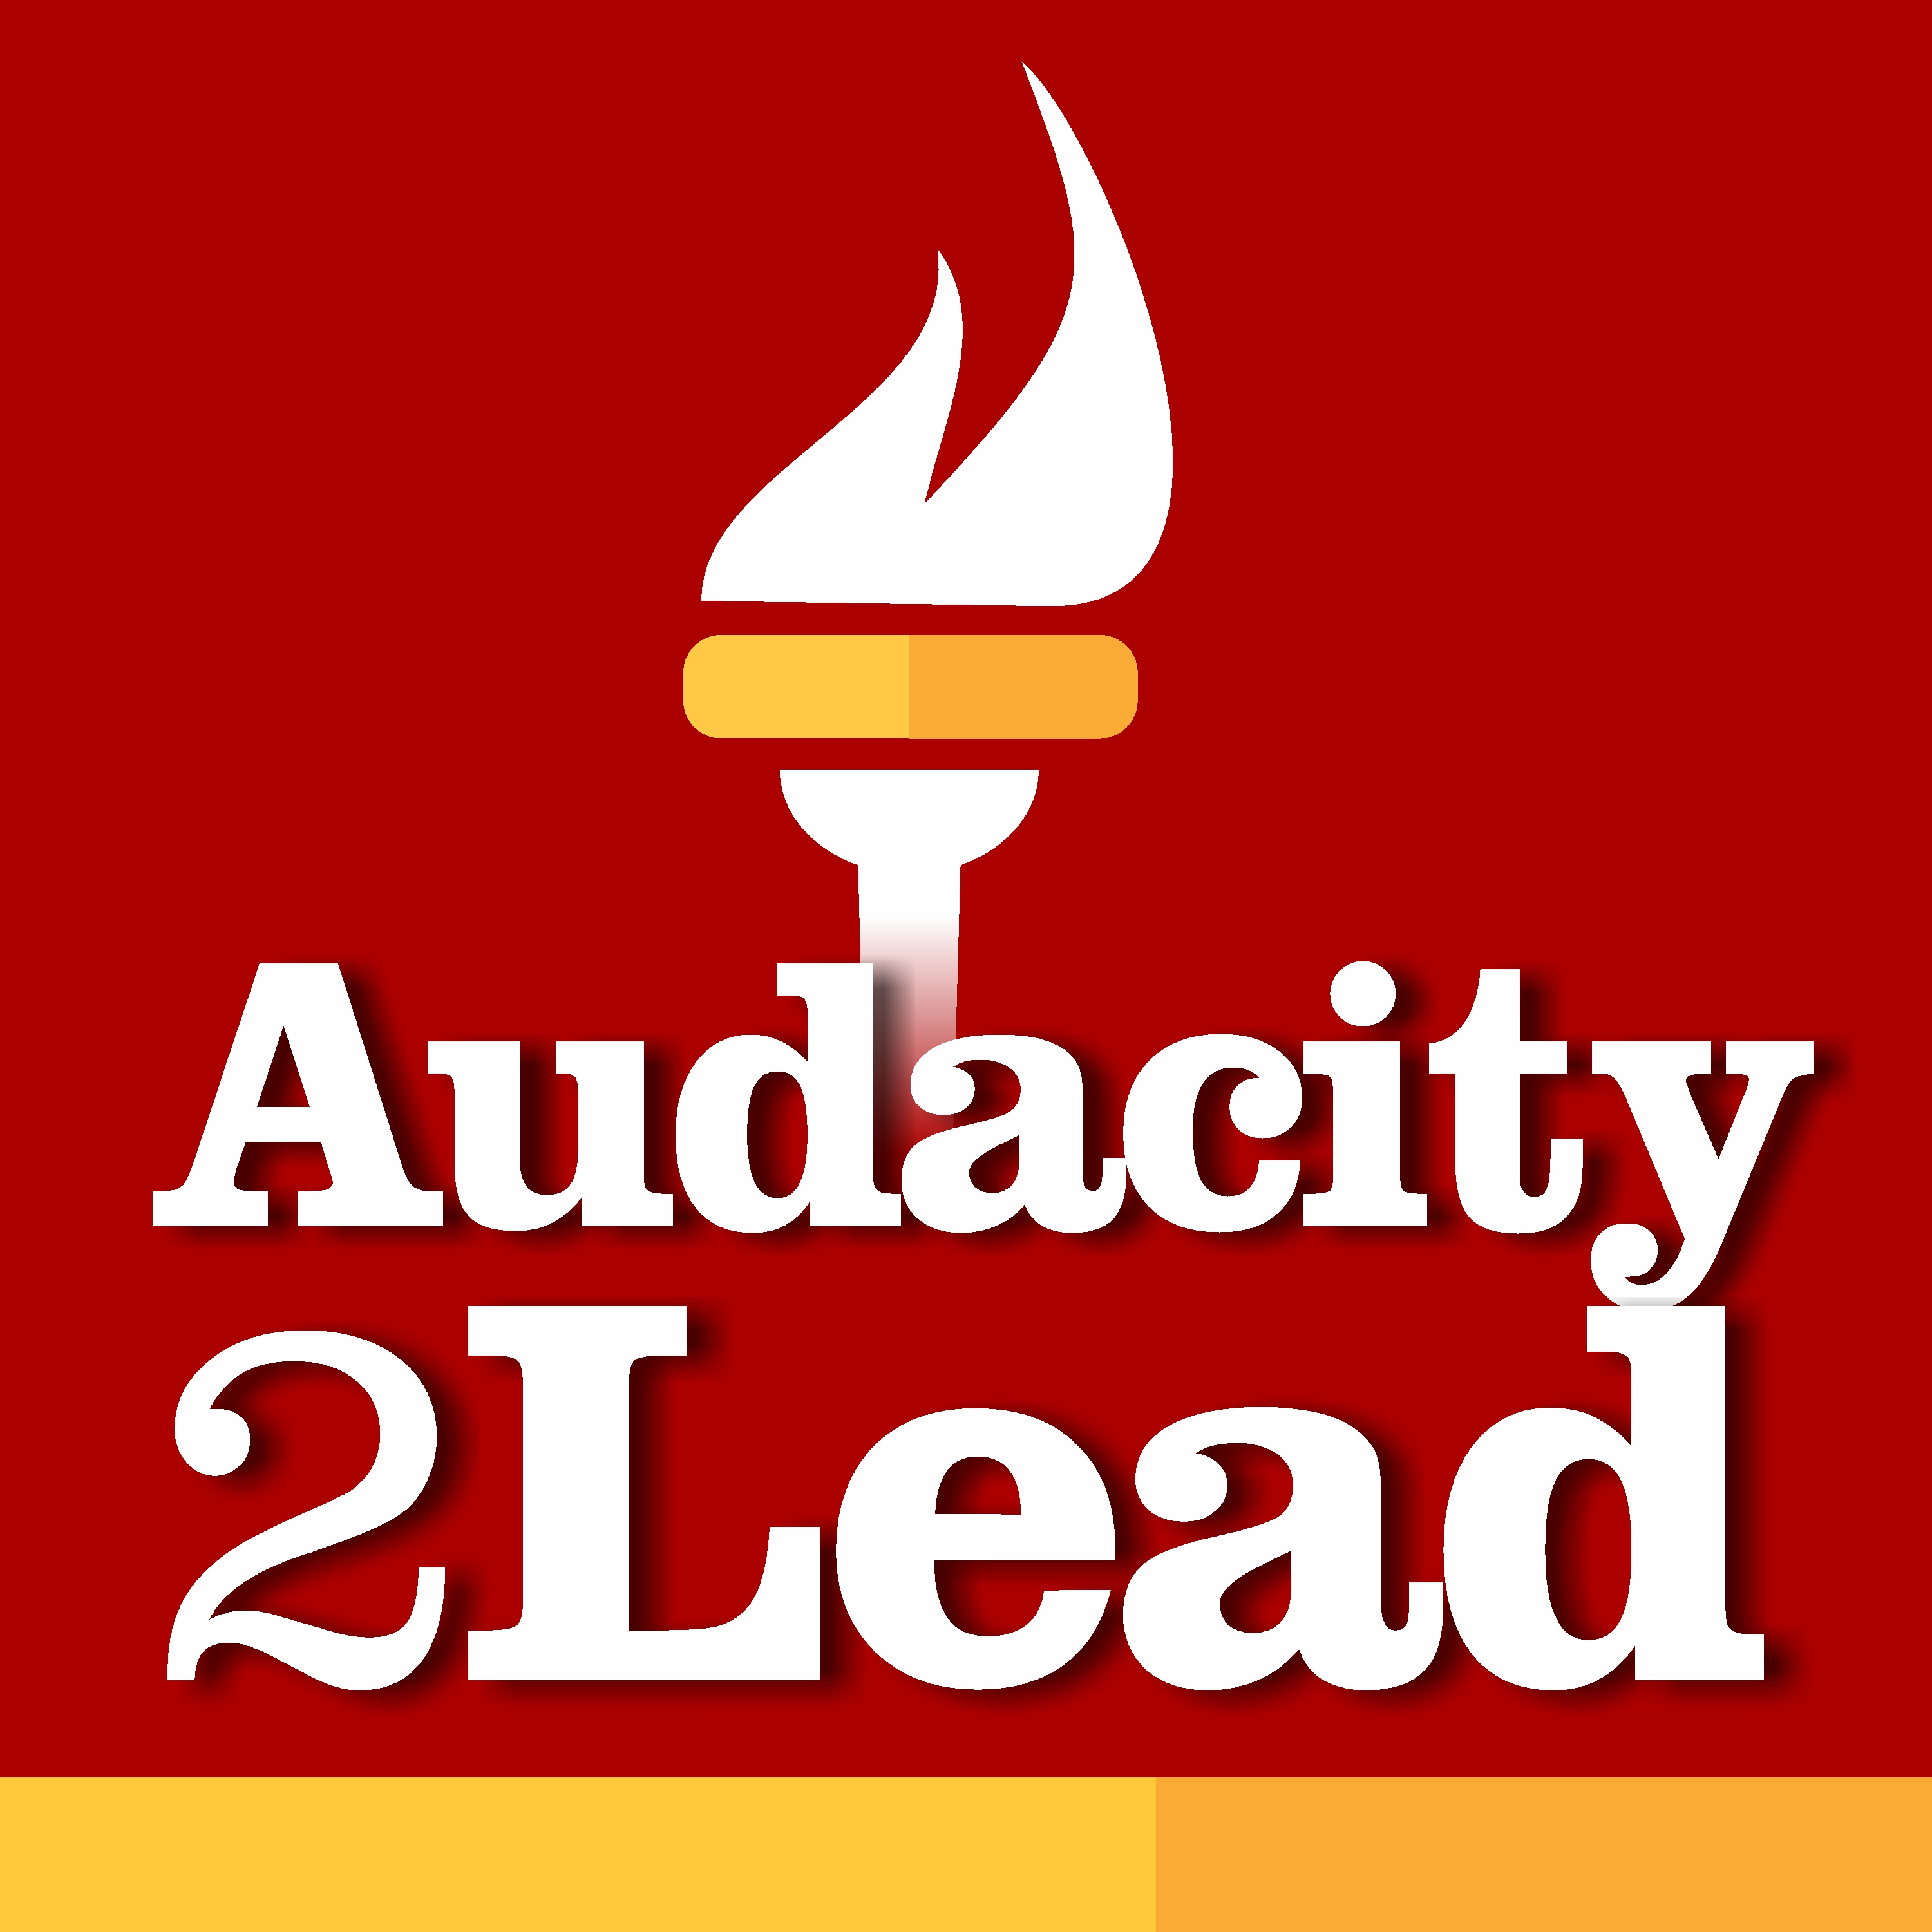 Audacity2Lead: Courage and Insight for Leading with More Influence